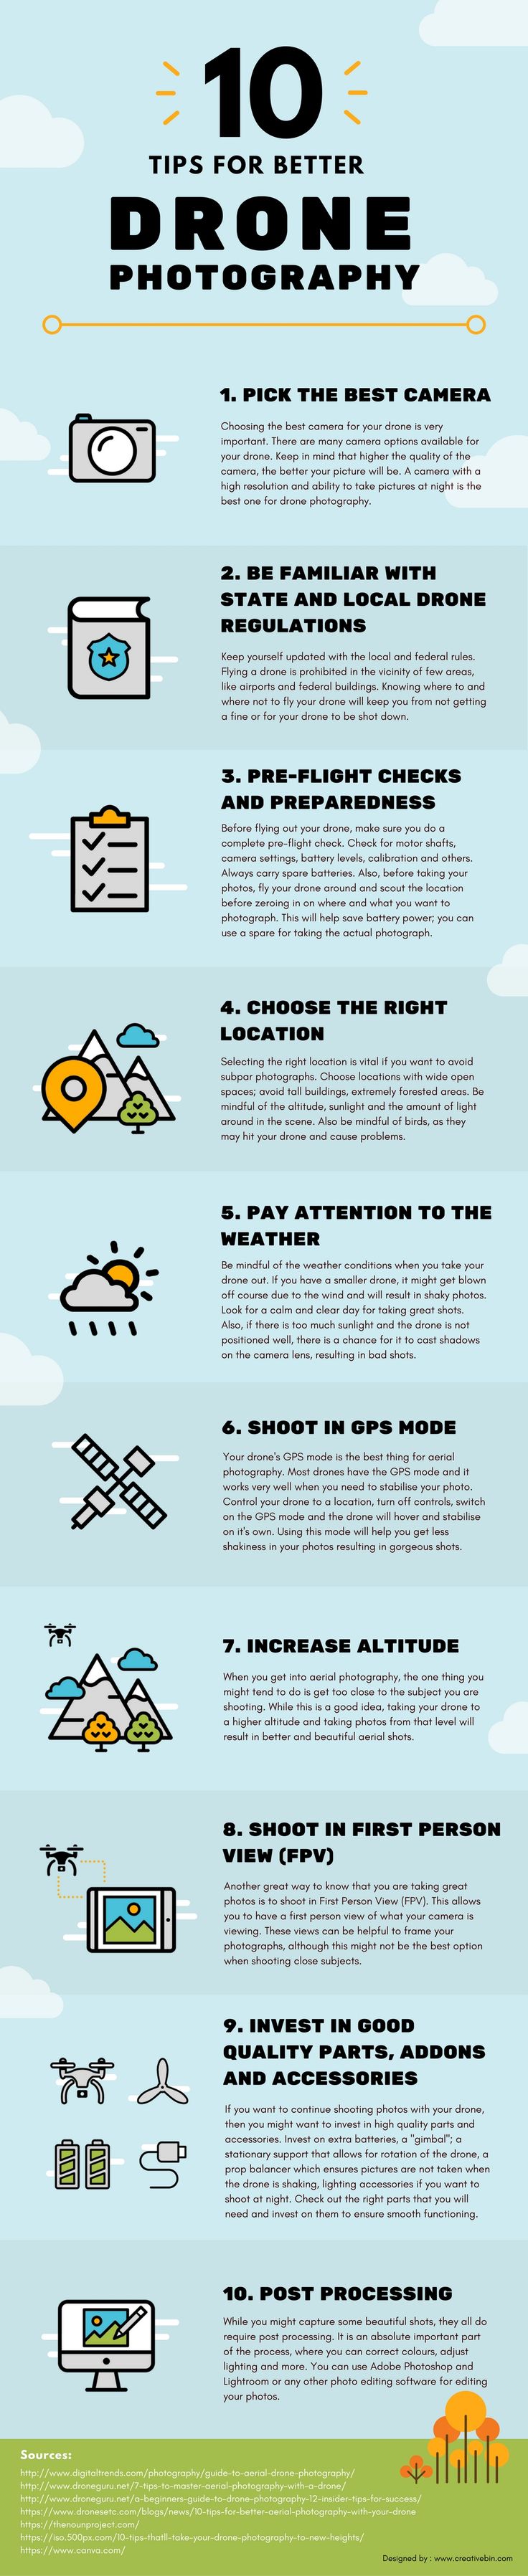 10 Tips For Better Drone Photography #Infographic #Drones #photography